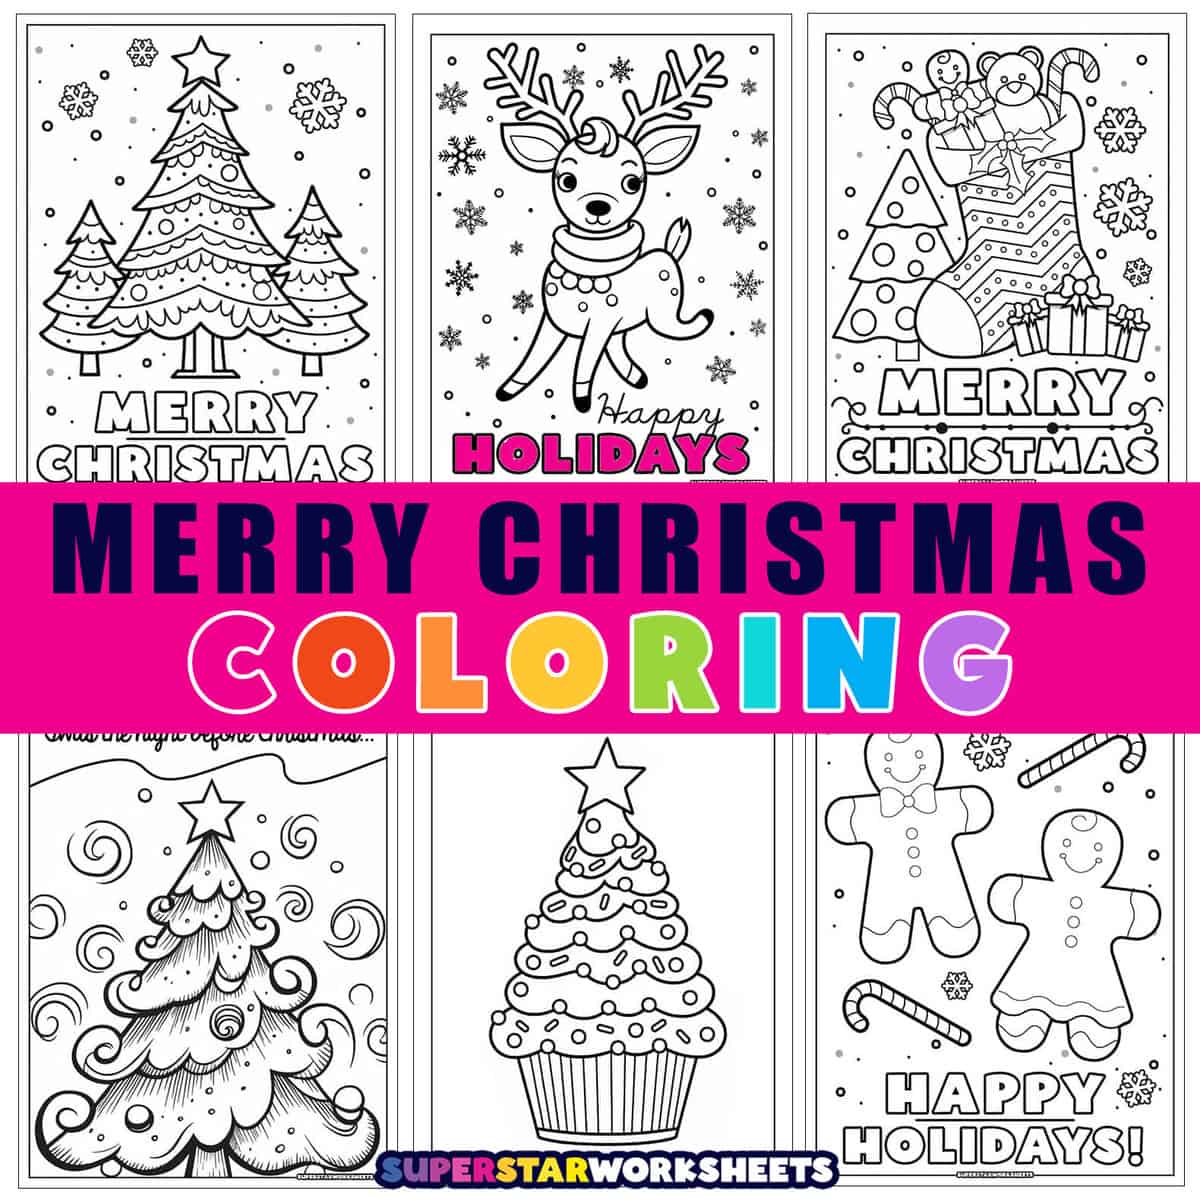 Merry christmas coloring pages